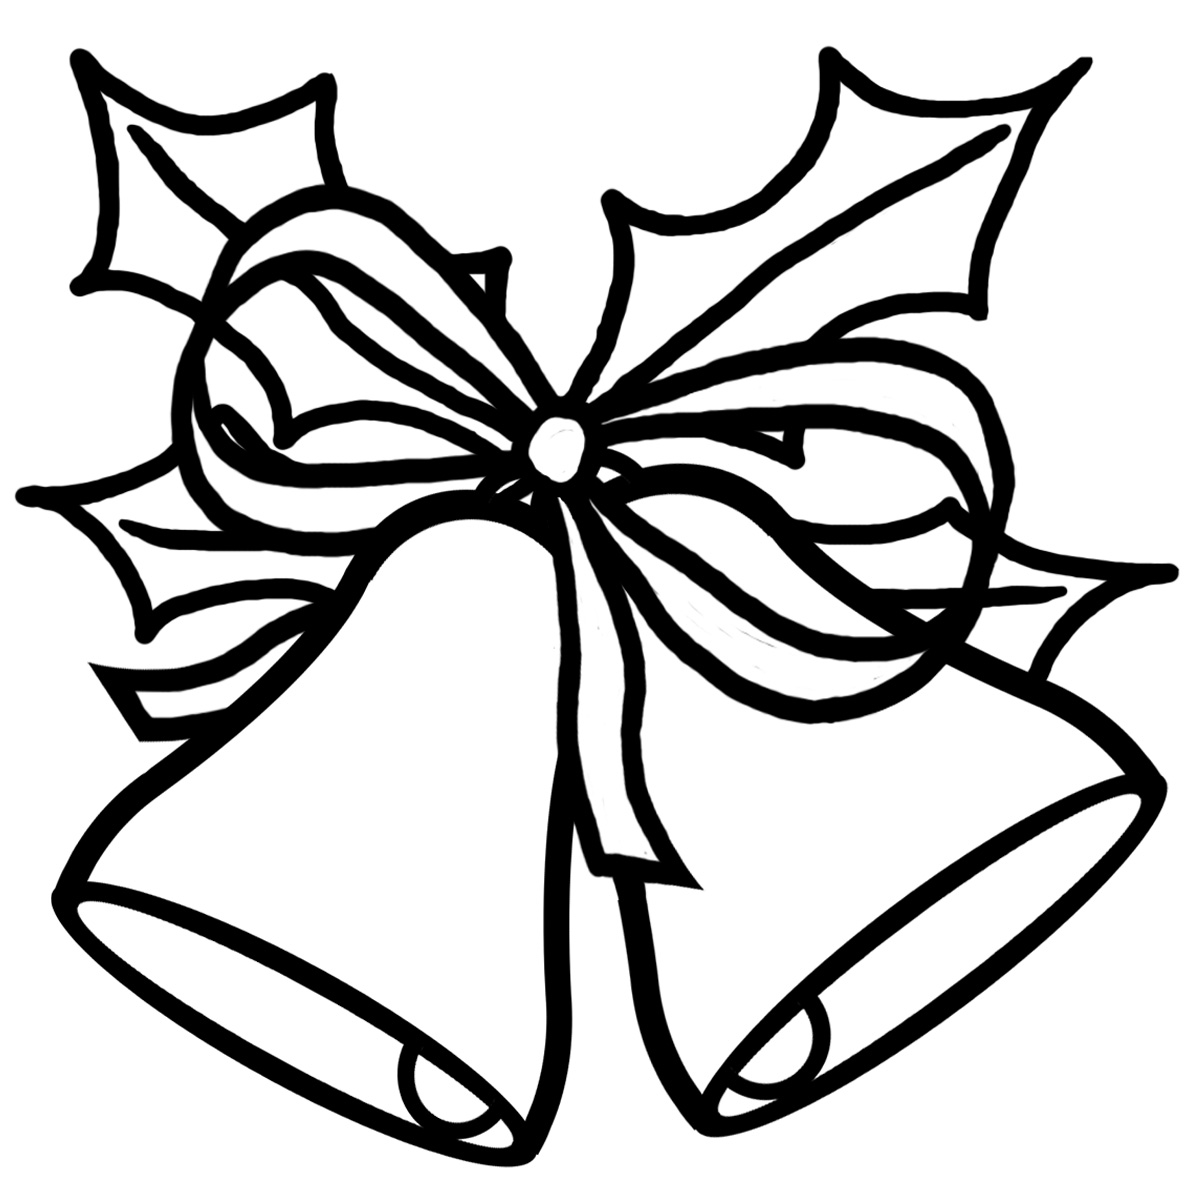 Images For > Black And White Christmas Tree Clip Art